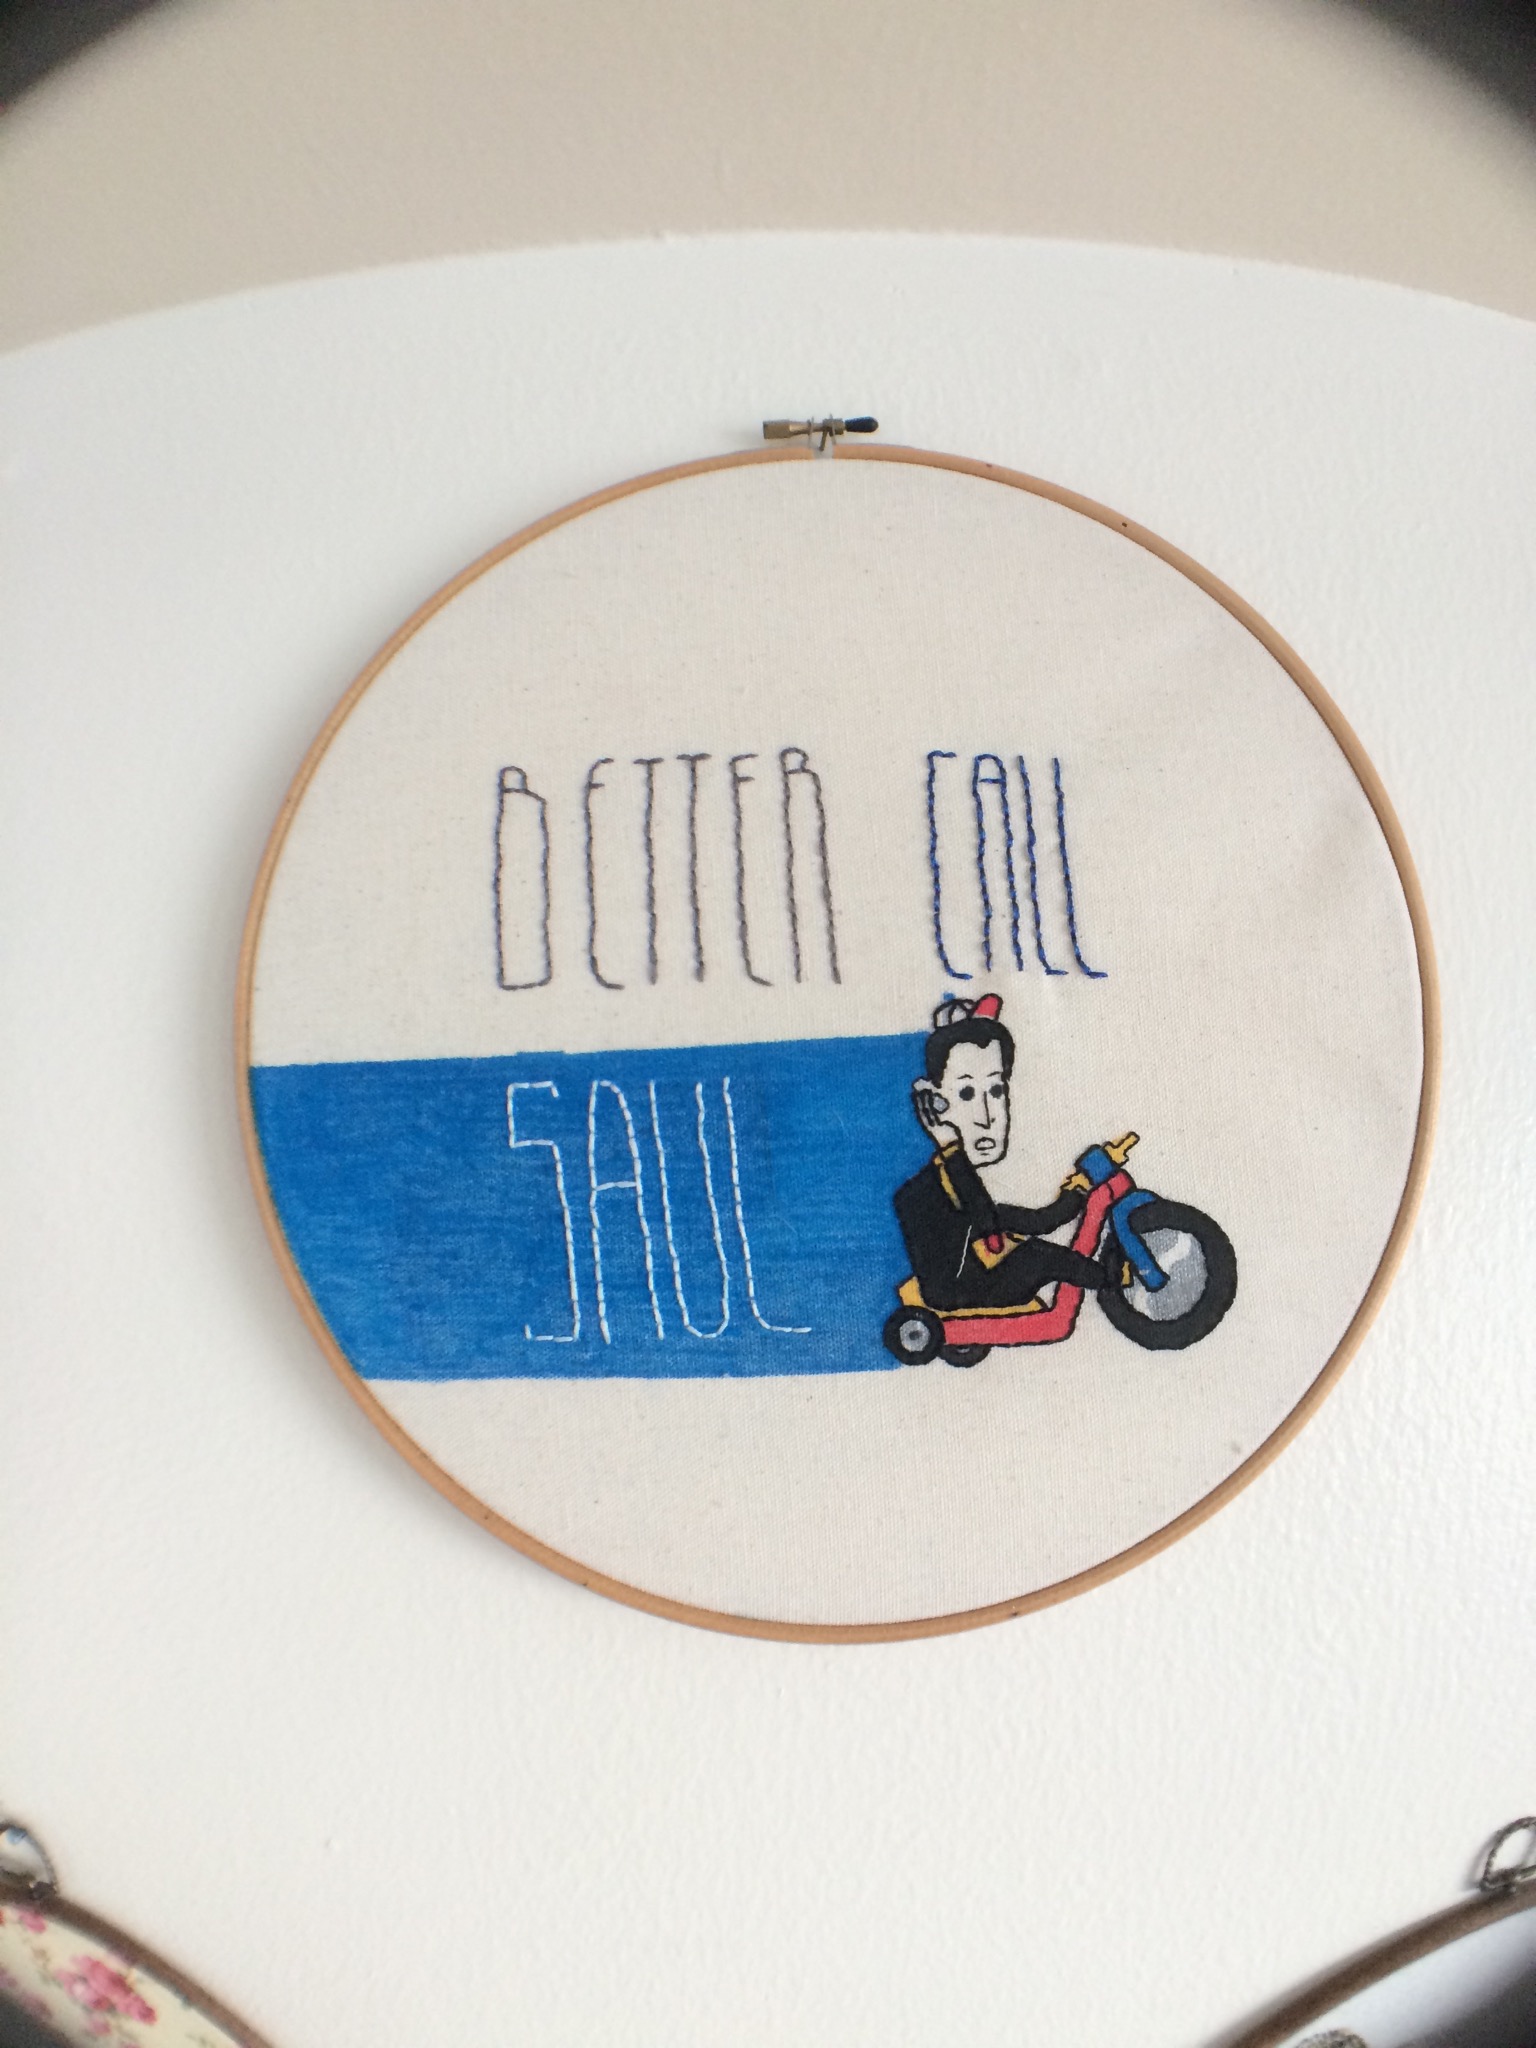 embroidery better call saul